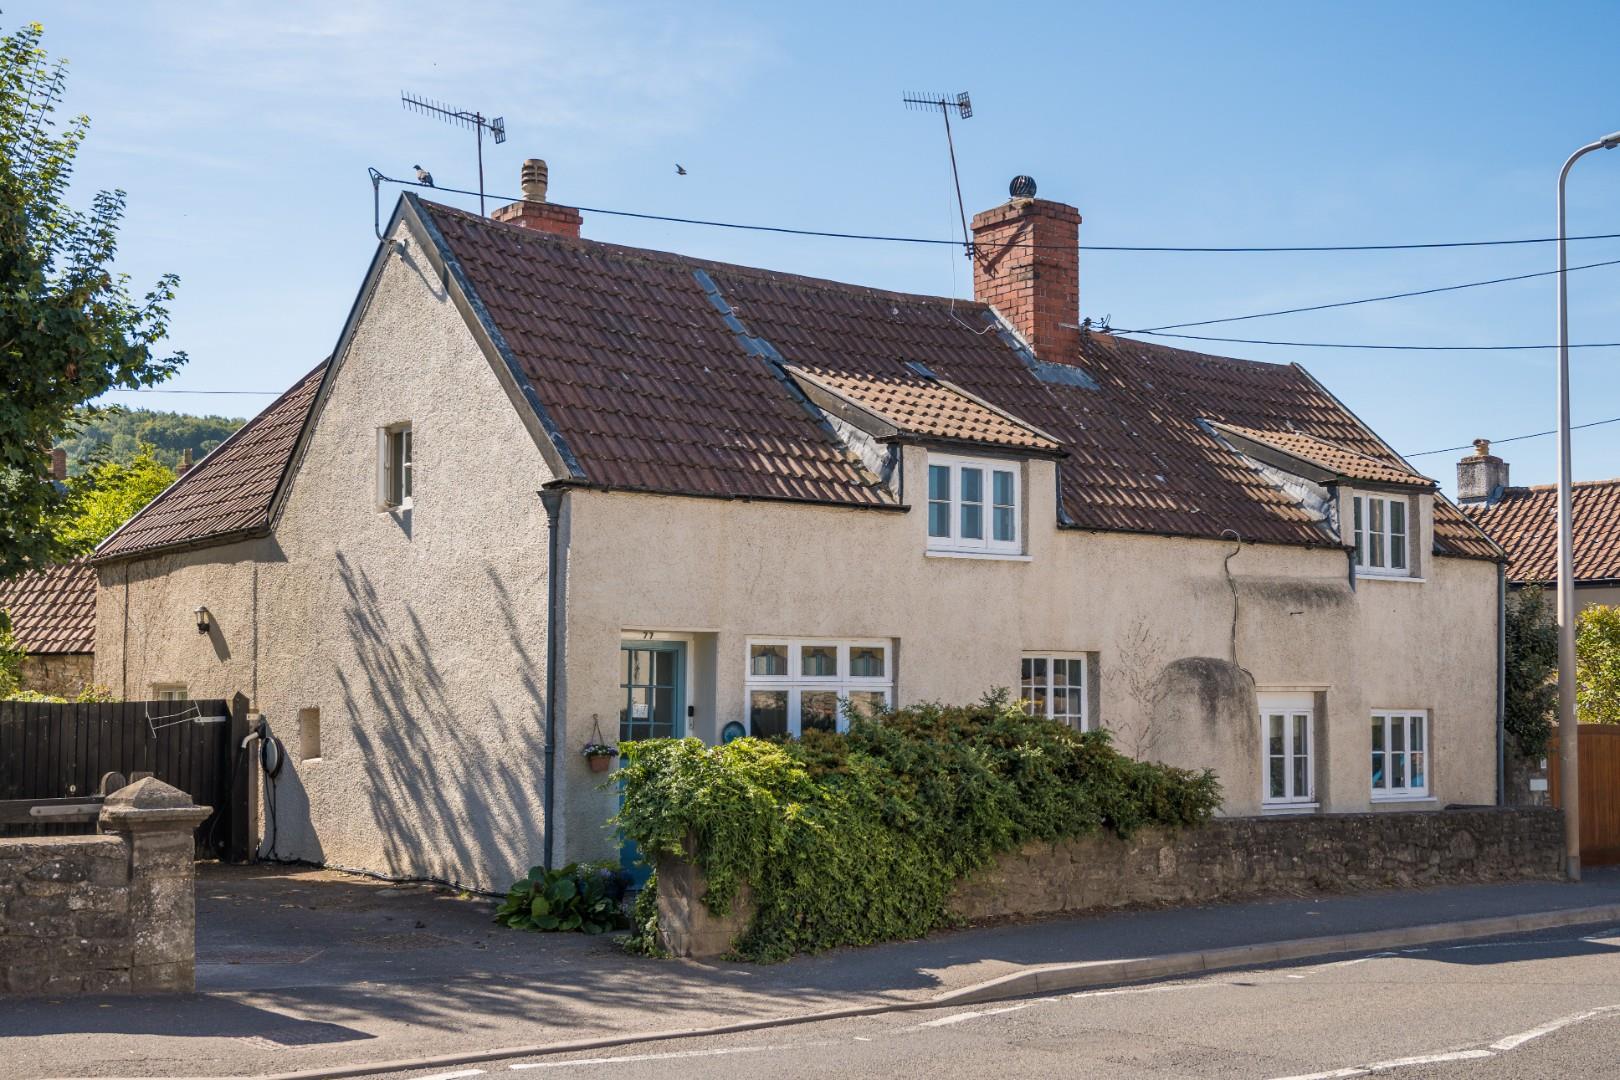 Detached 17th century cottage in the highly regarded village of Backwell